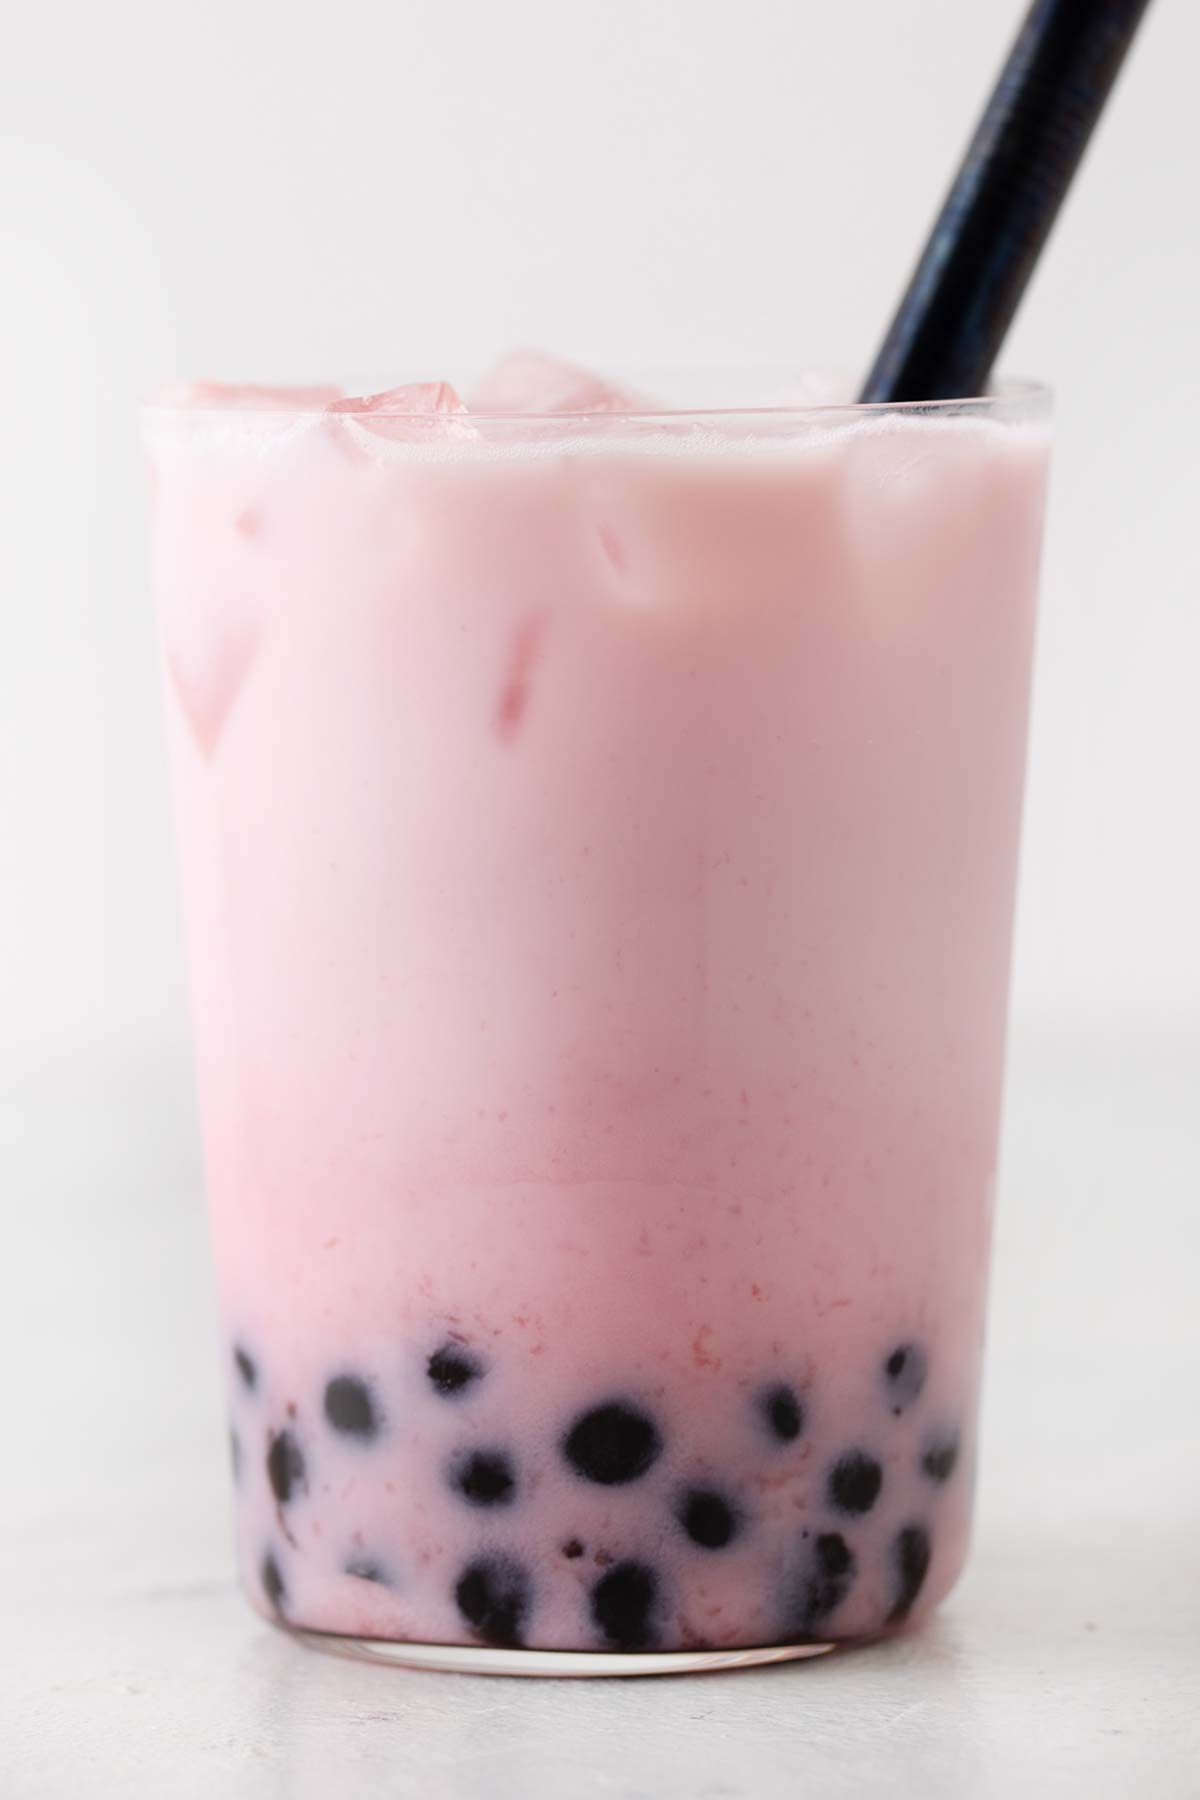 Strawberry milk tea with boba in a glass cup.